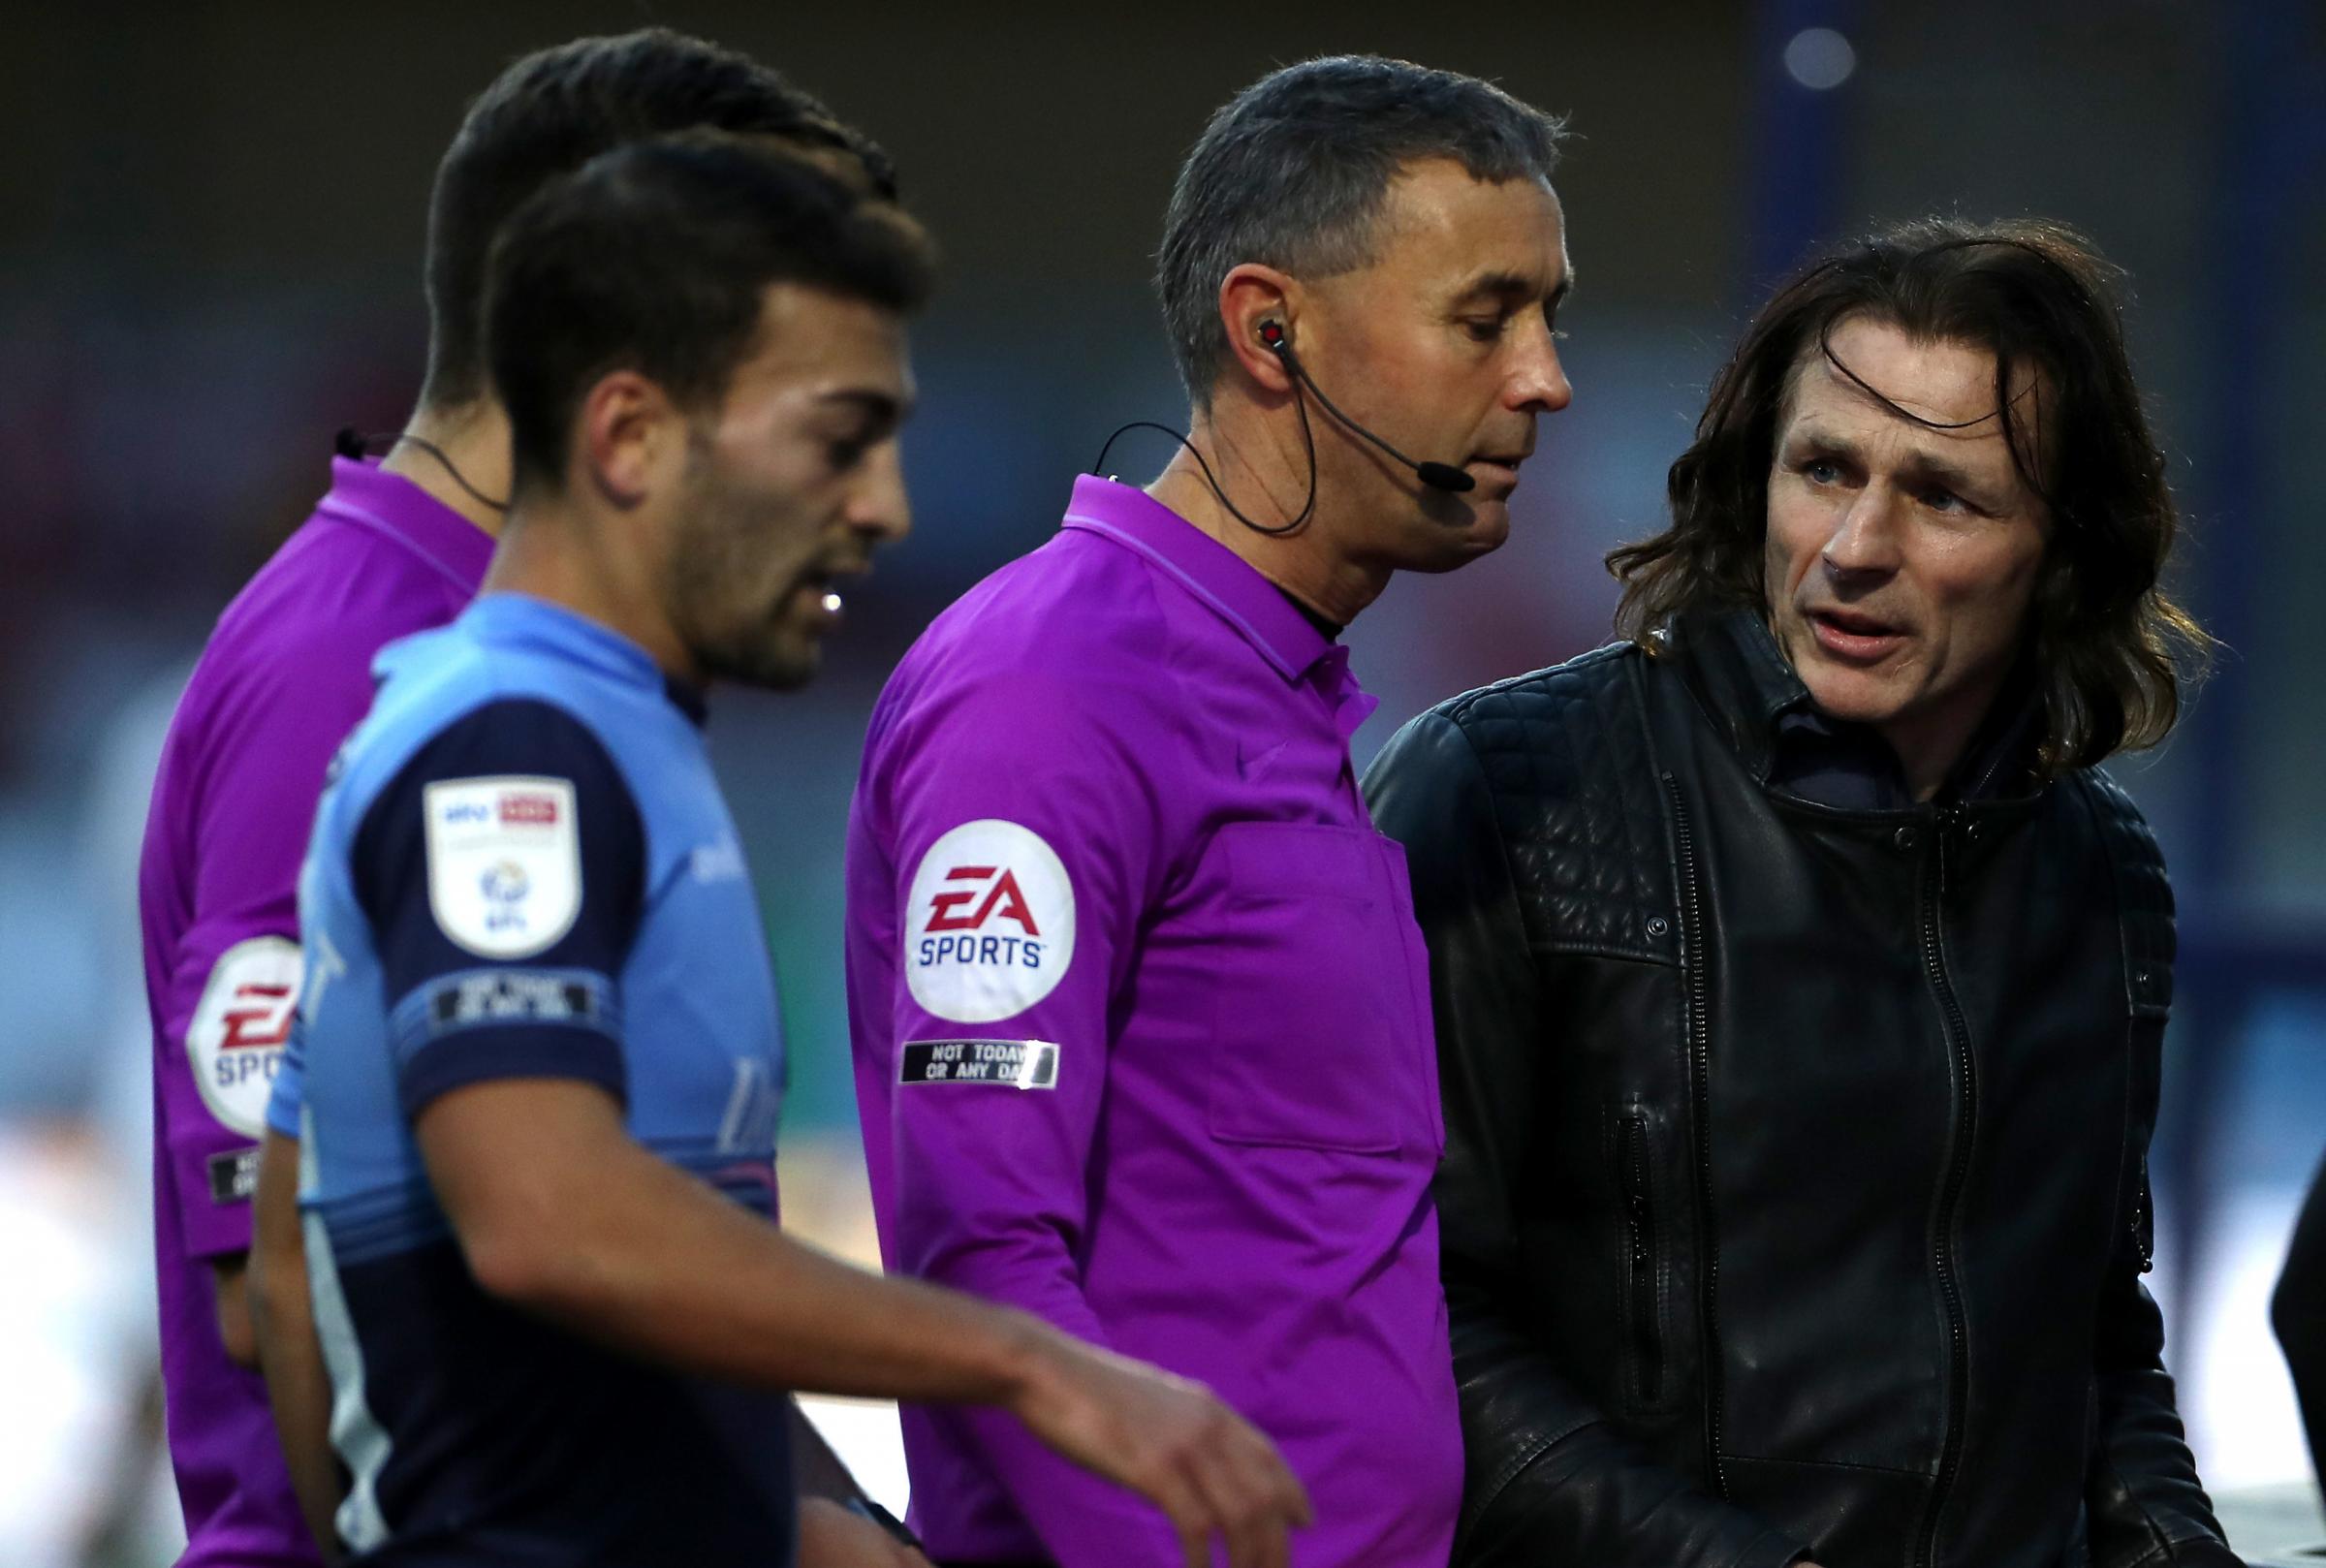 Several poor refereeing decisions have cost Wycombe points this season (Prime Media)